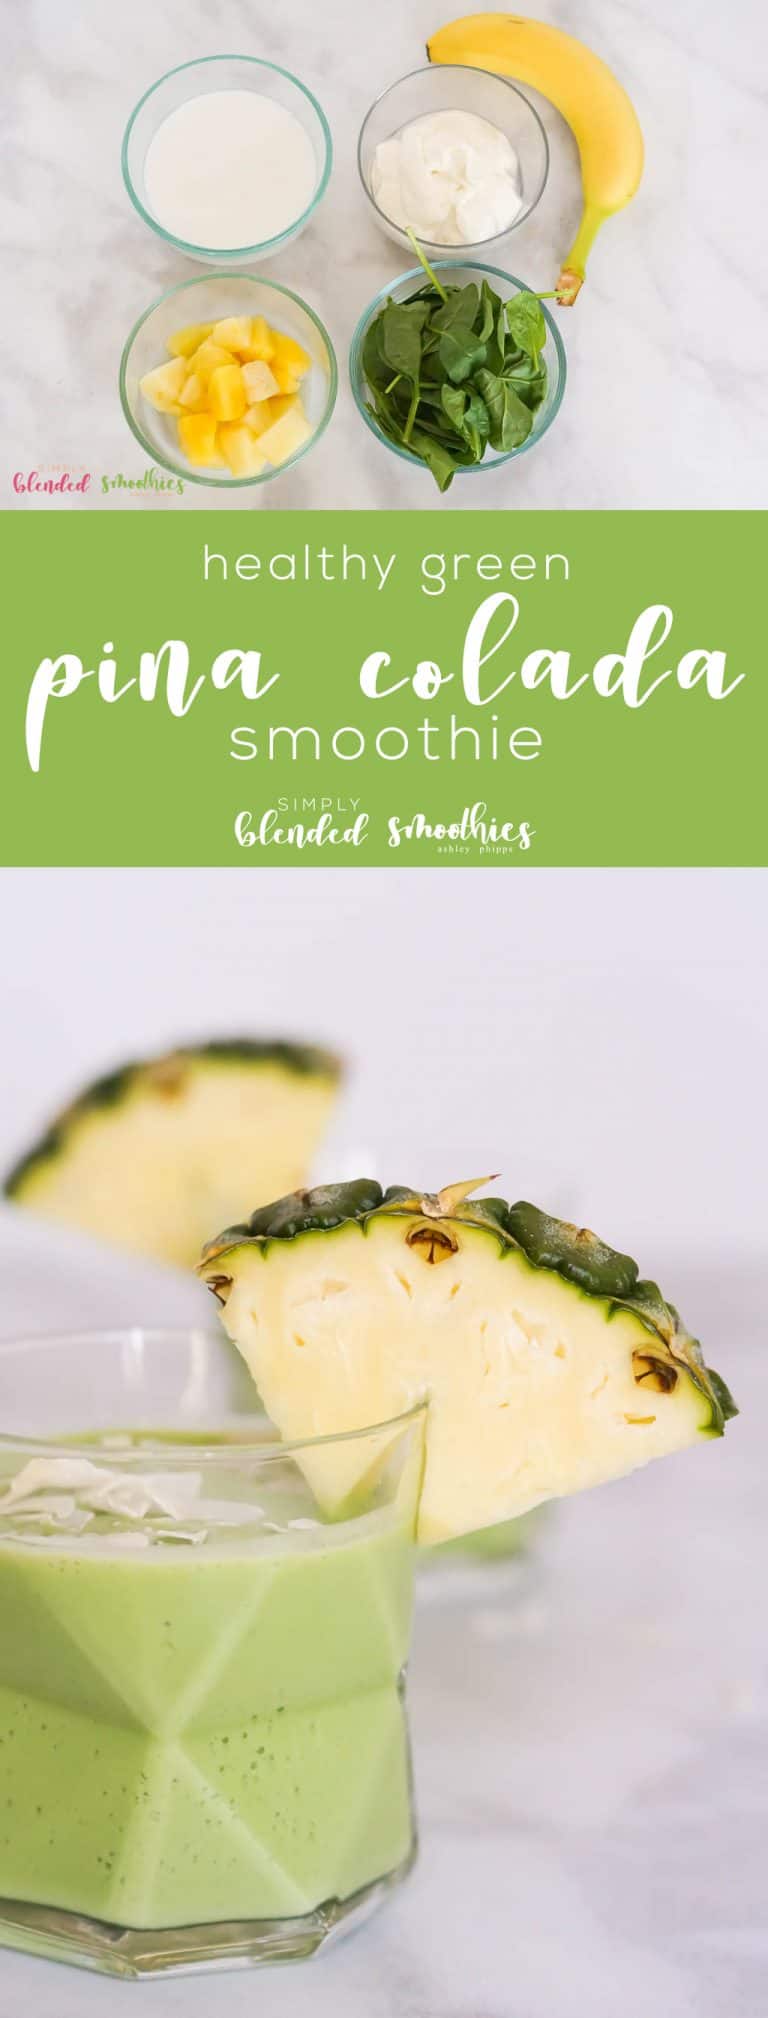 Green Pina Colada Smoothie | Simply Blended Smoothies